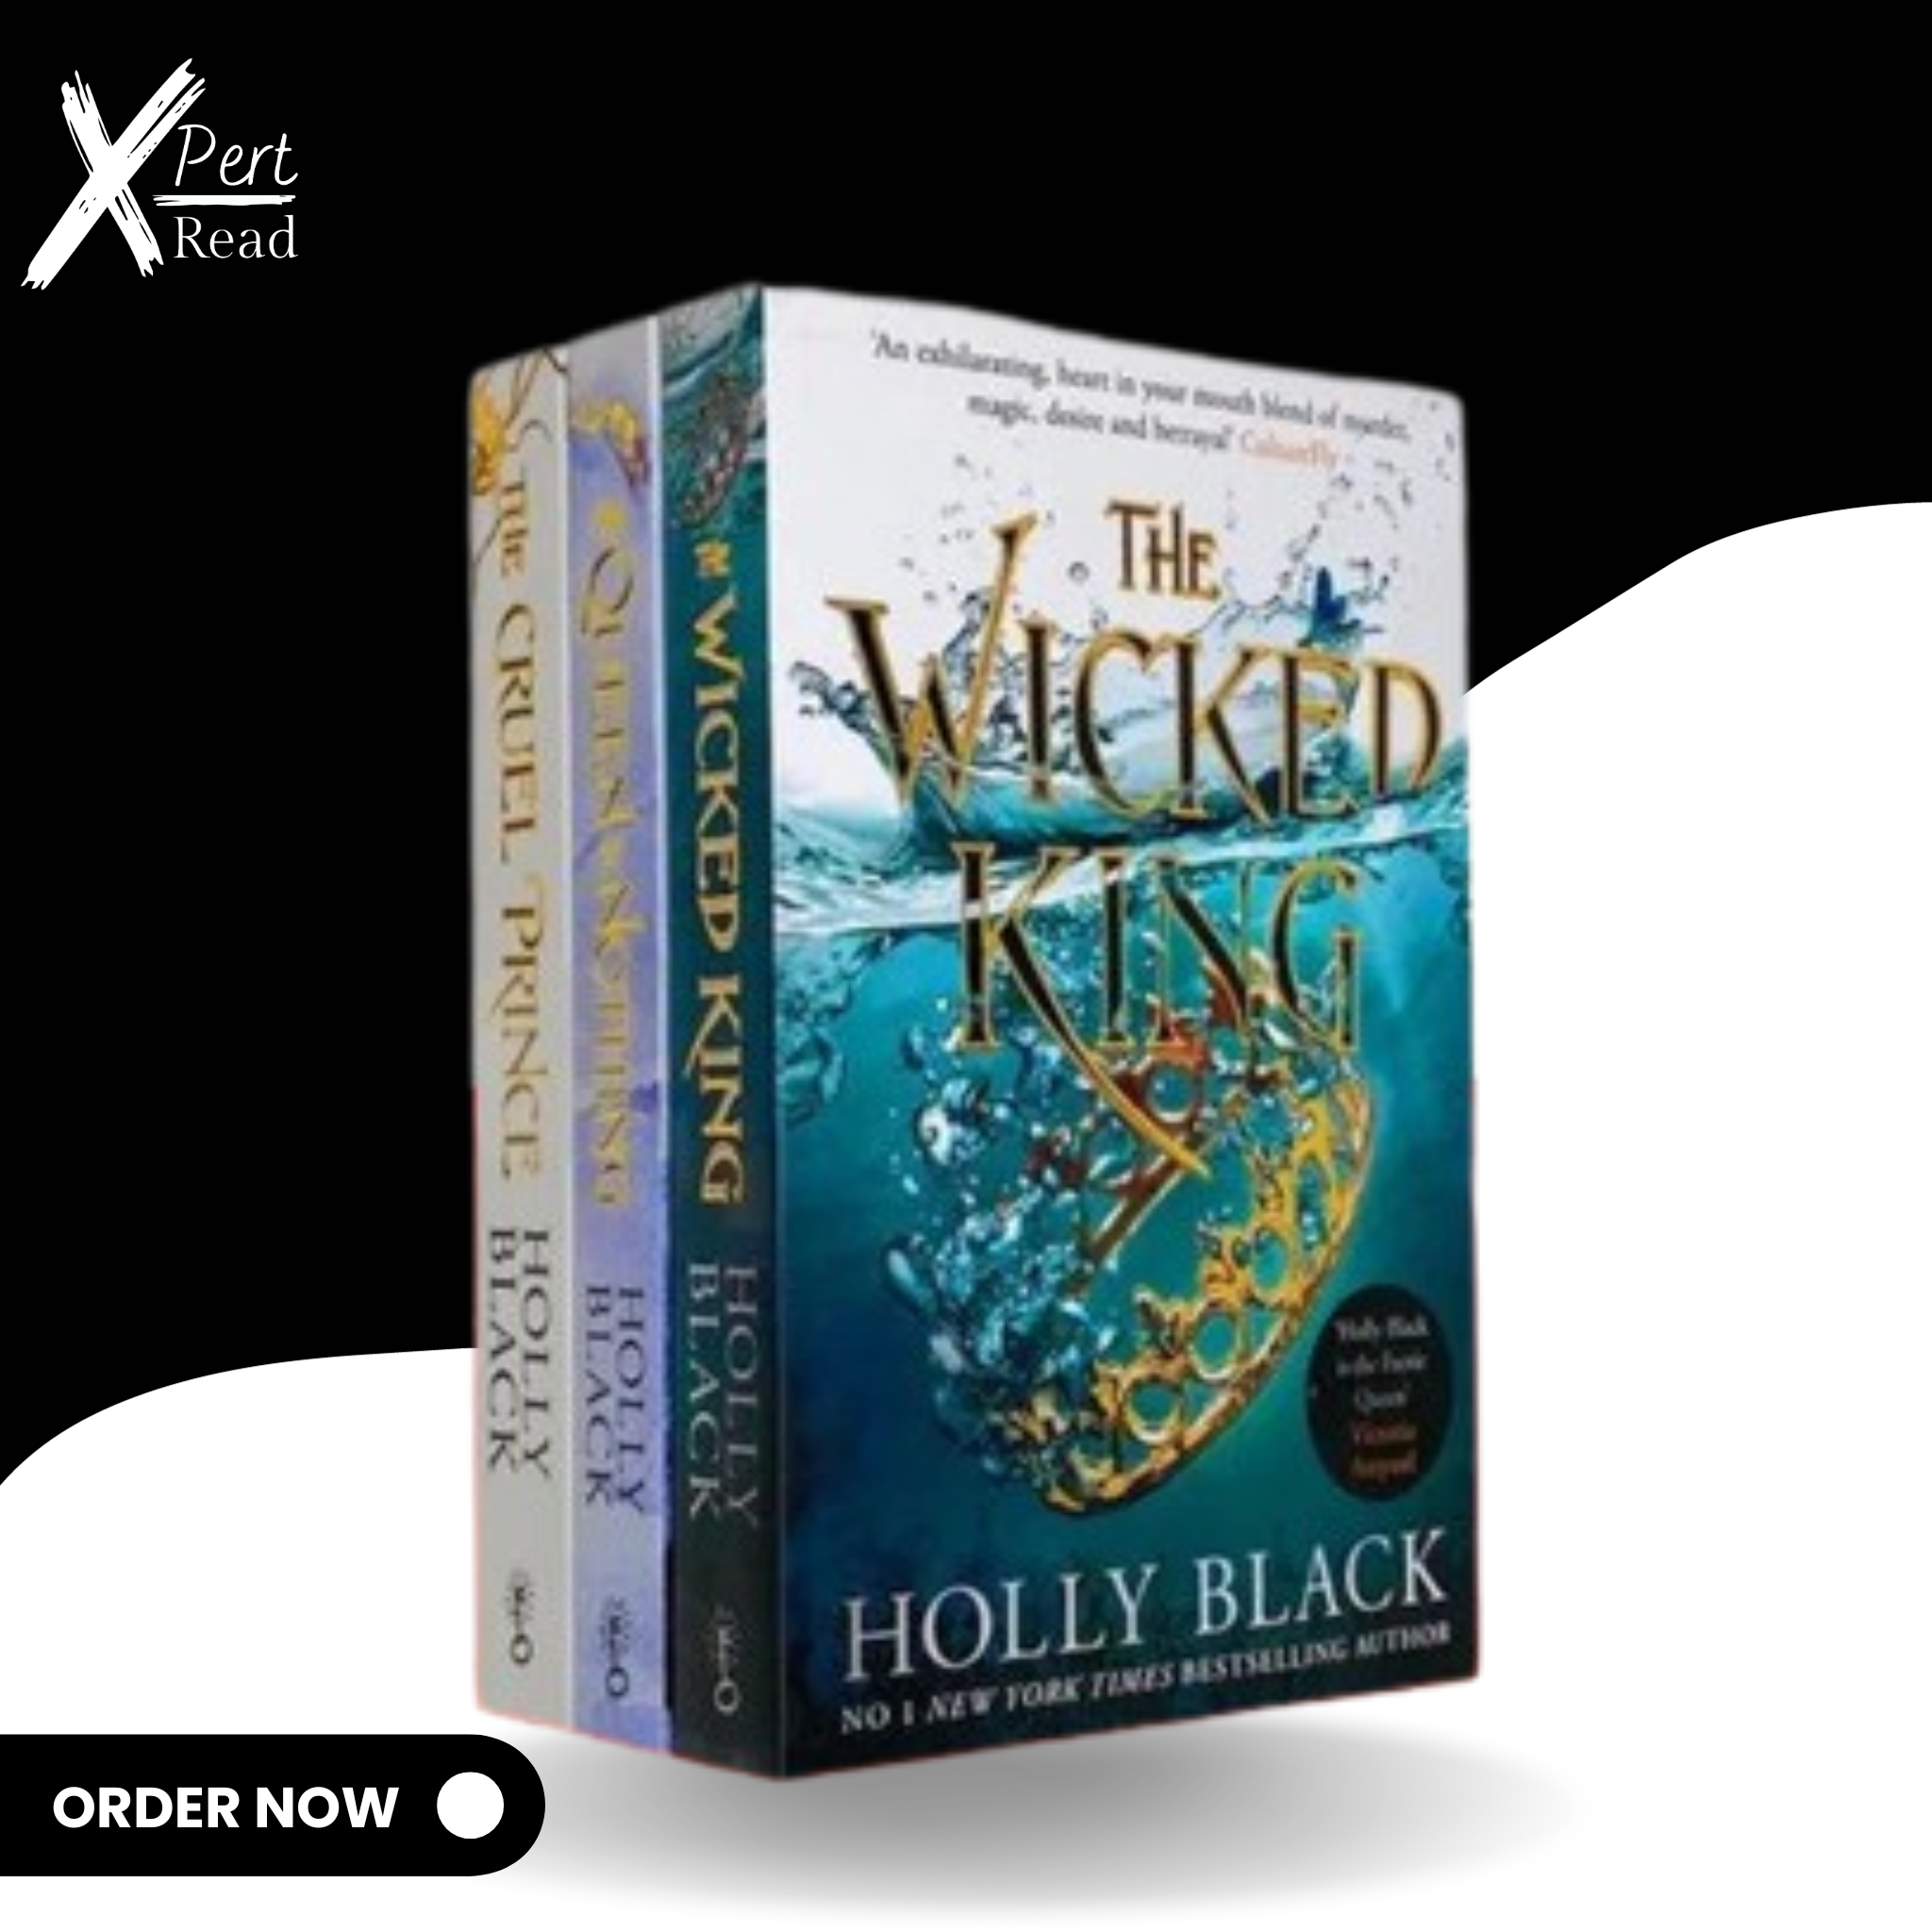 The Folk Of The Air Series (3 Books) The Cruel Prince, The Wicked King, The Queen Of Nothing By HOLLY BLAC